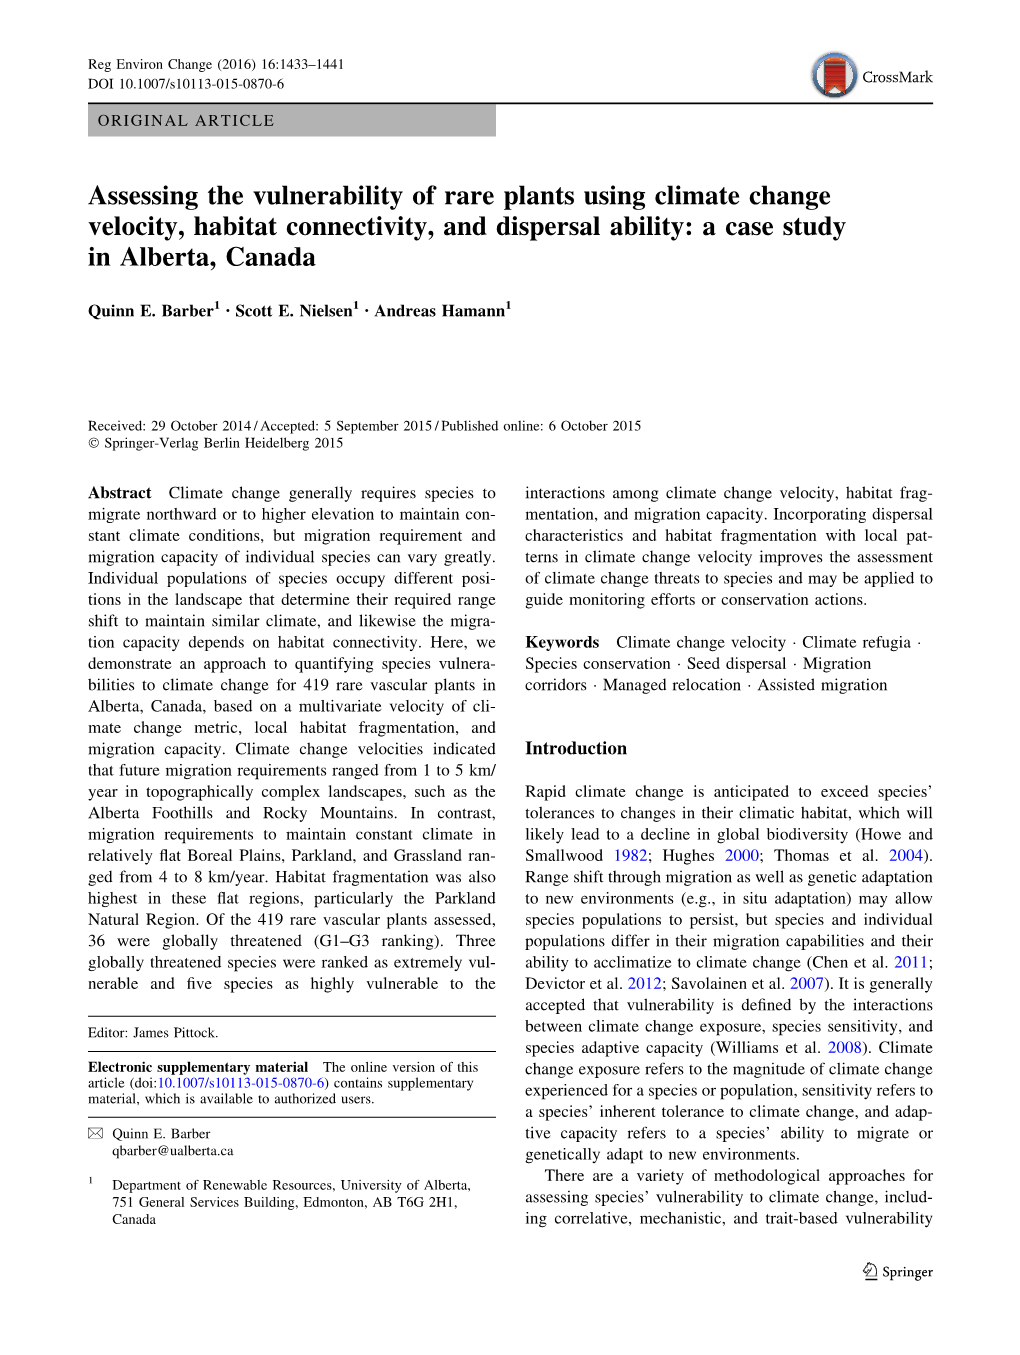 Assessing the Vulnerability of Rare Plants Using Climate Change Velocity, Habitat Connectivity, and Dispersal Ability: a Case Study in Alberta, Canada